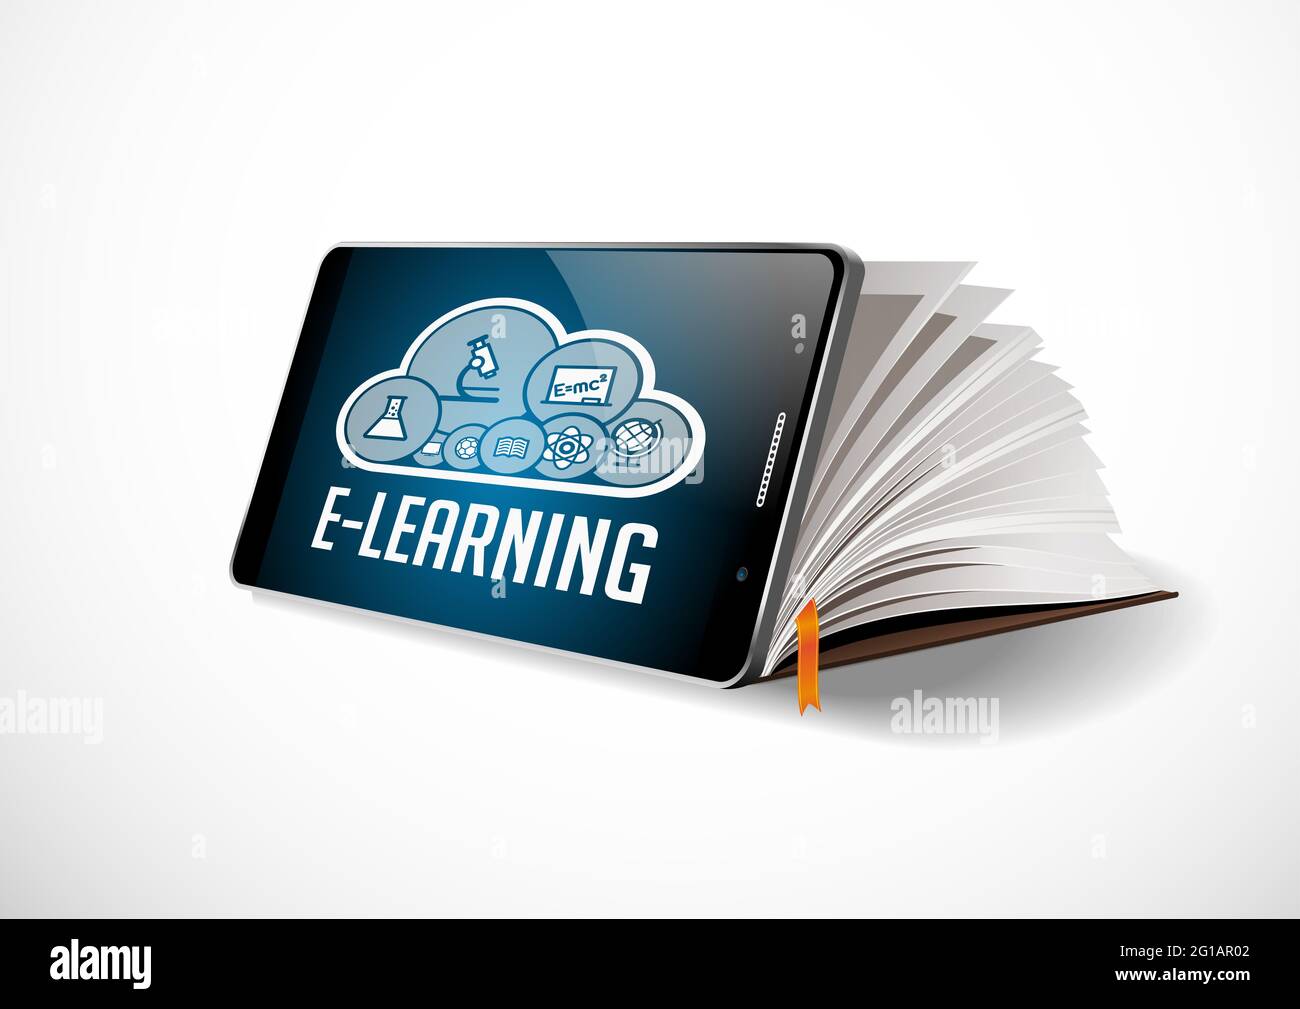 Elearning concept - mobile phone as book with word E-LEARNING Stock Photo